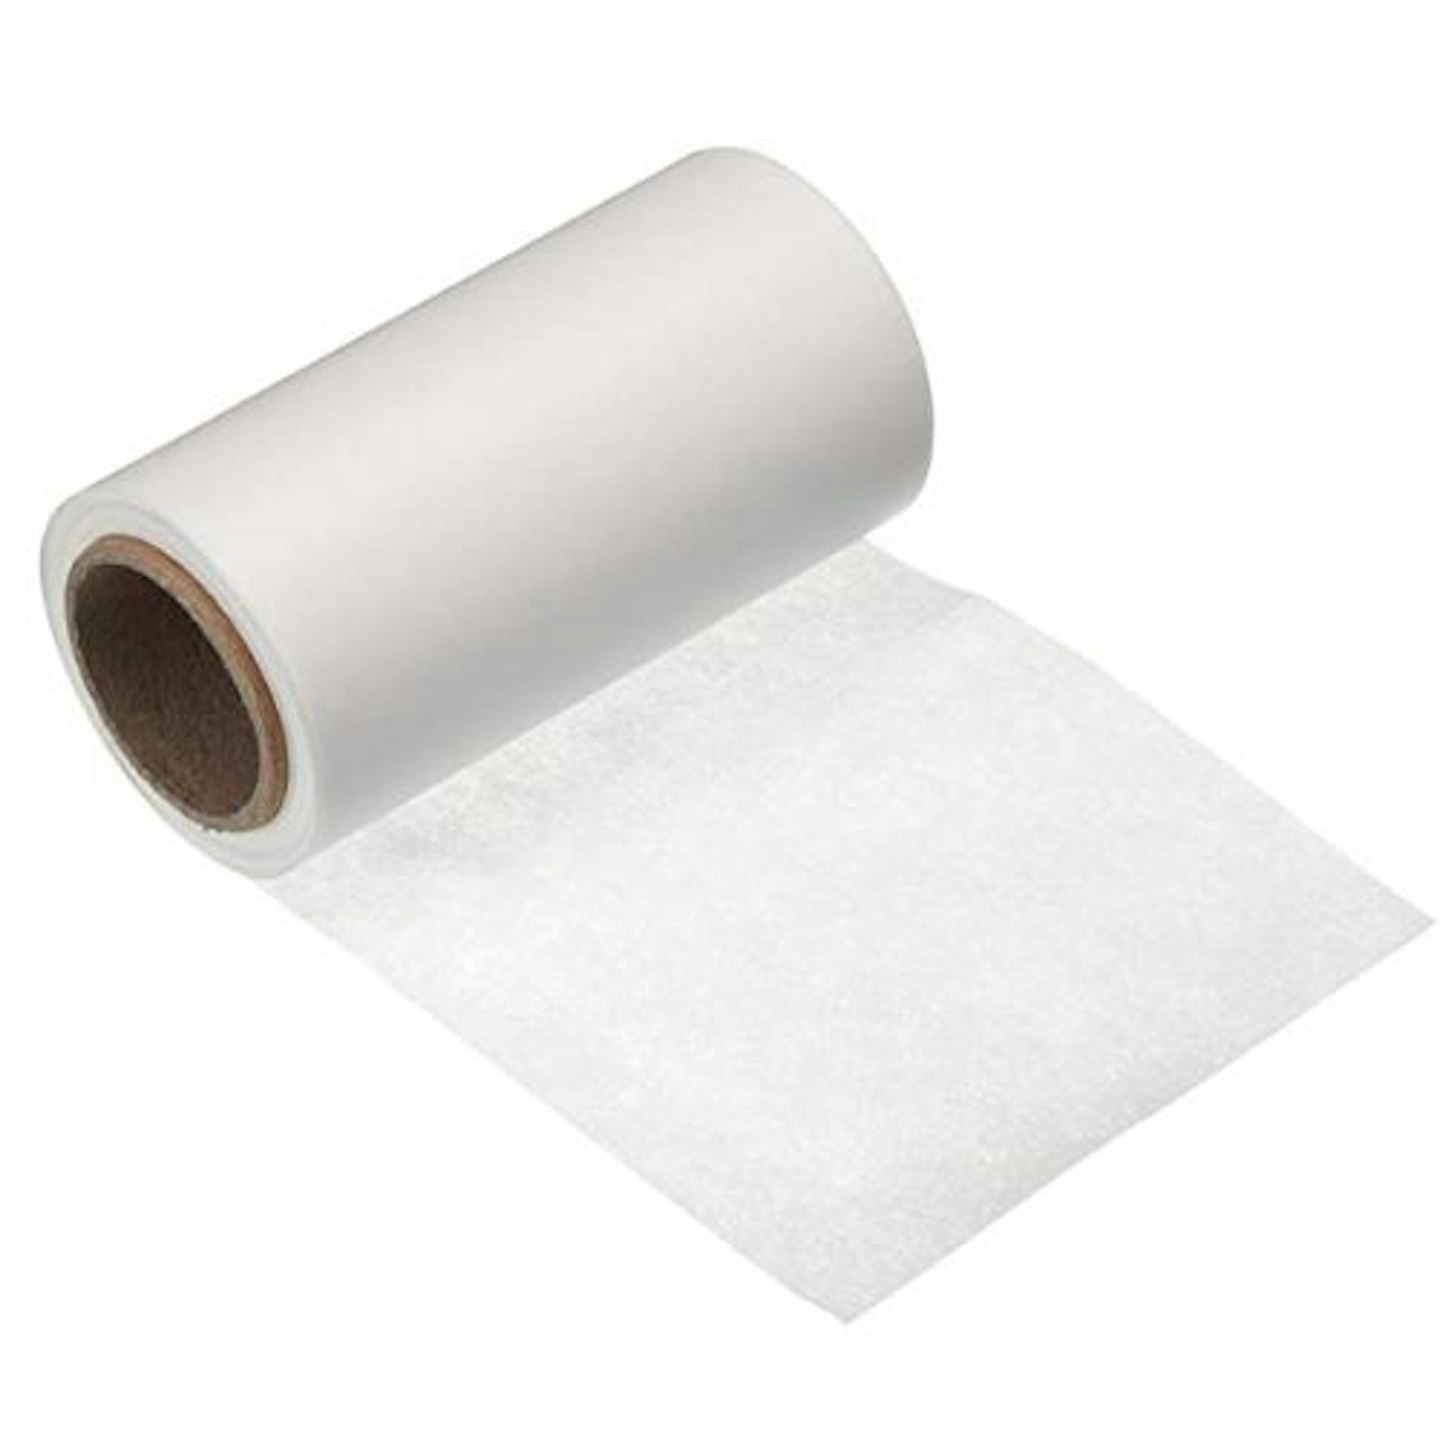 KitchenCraft Sweetly Does It 25m Baking Parchment Roll